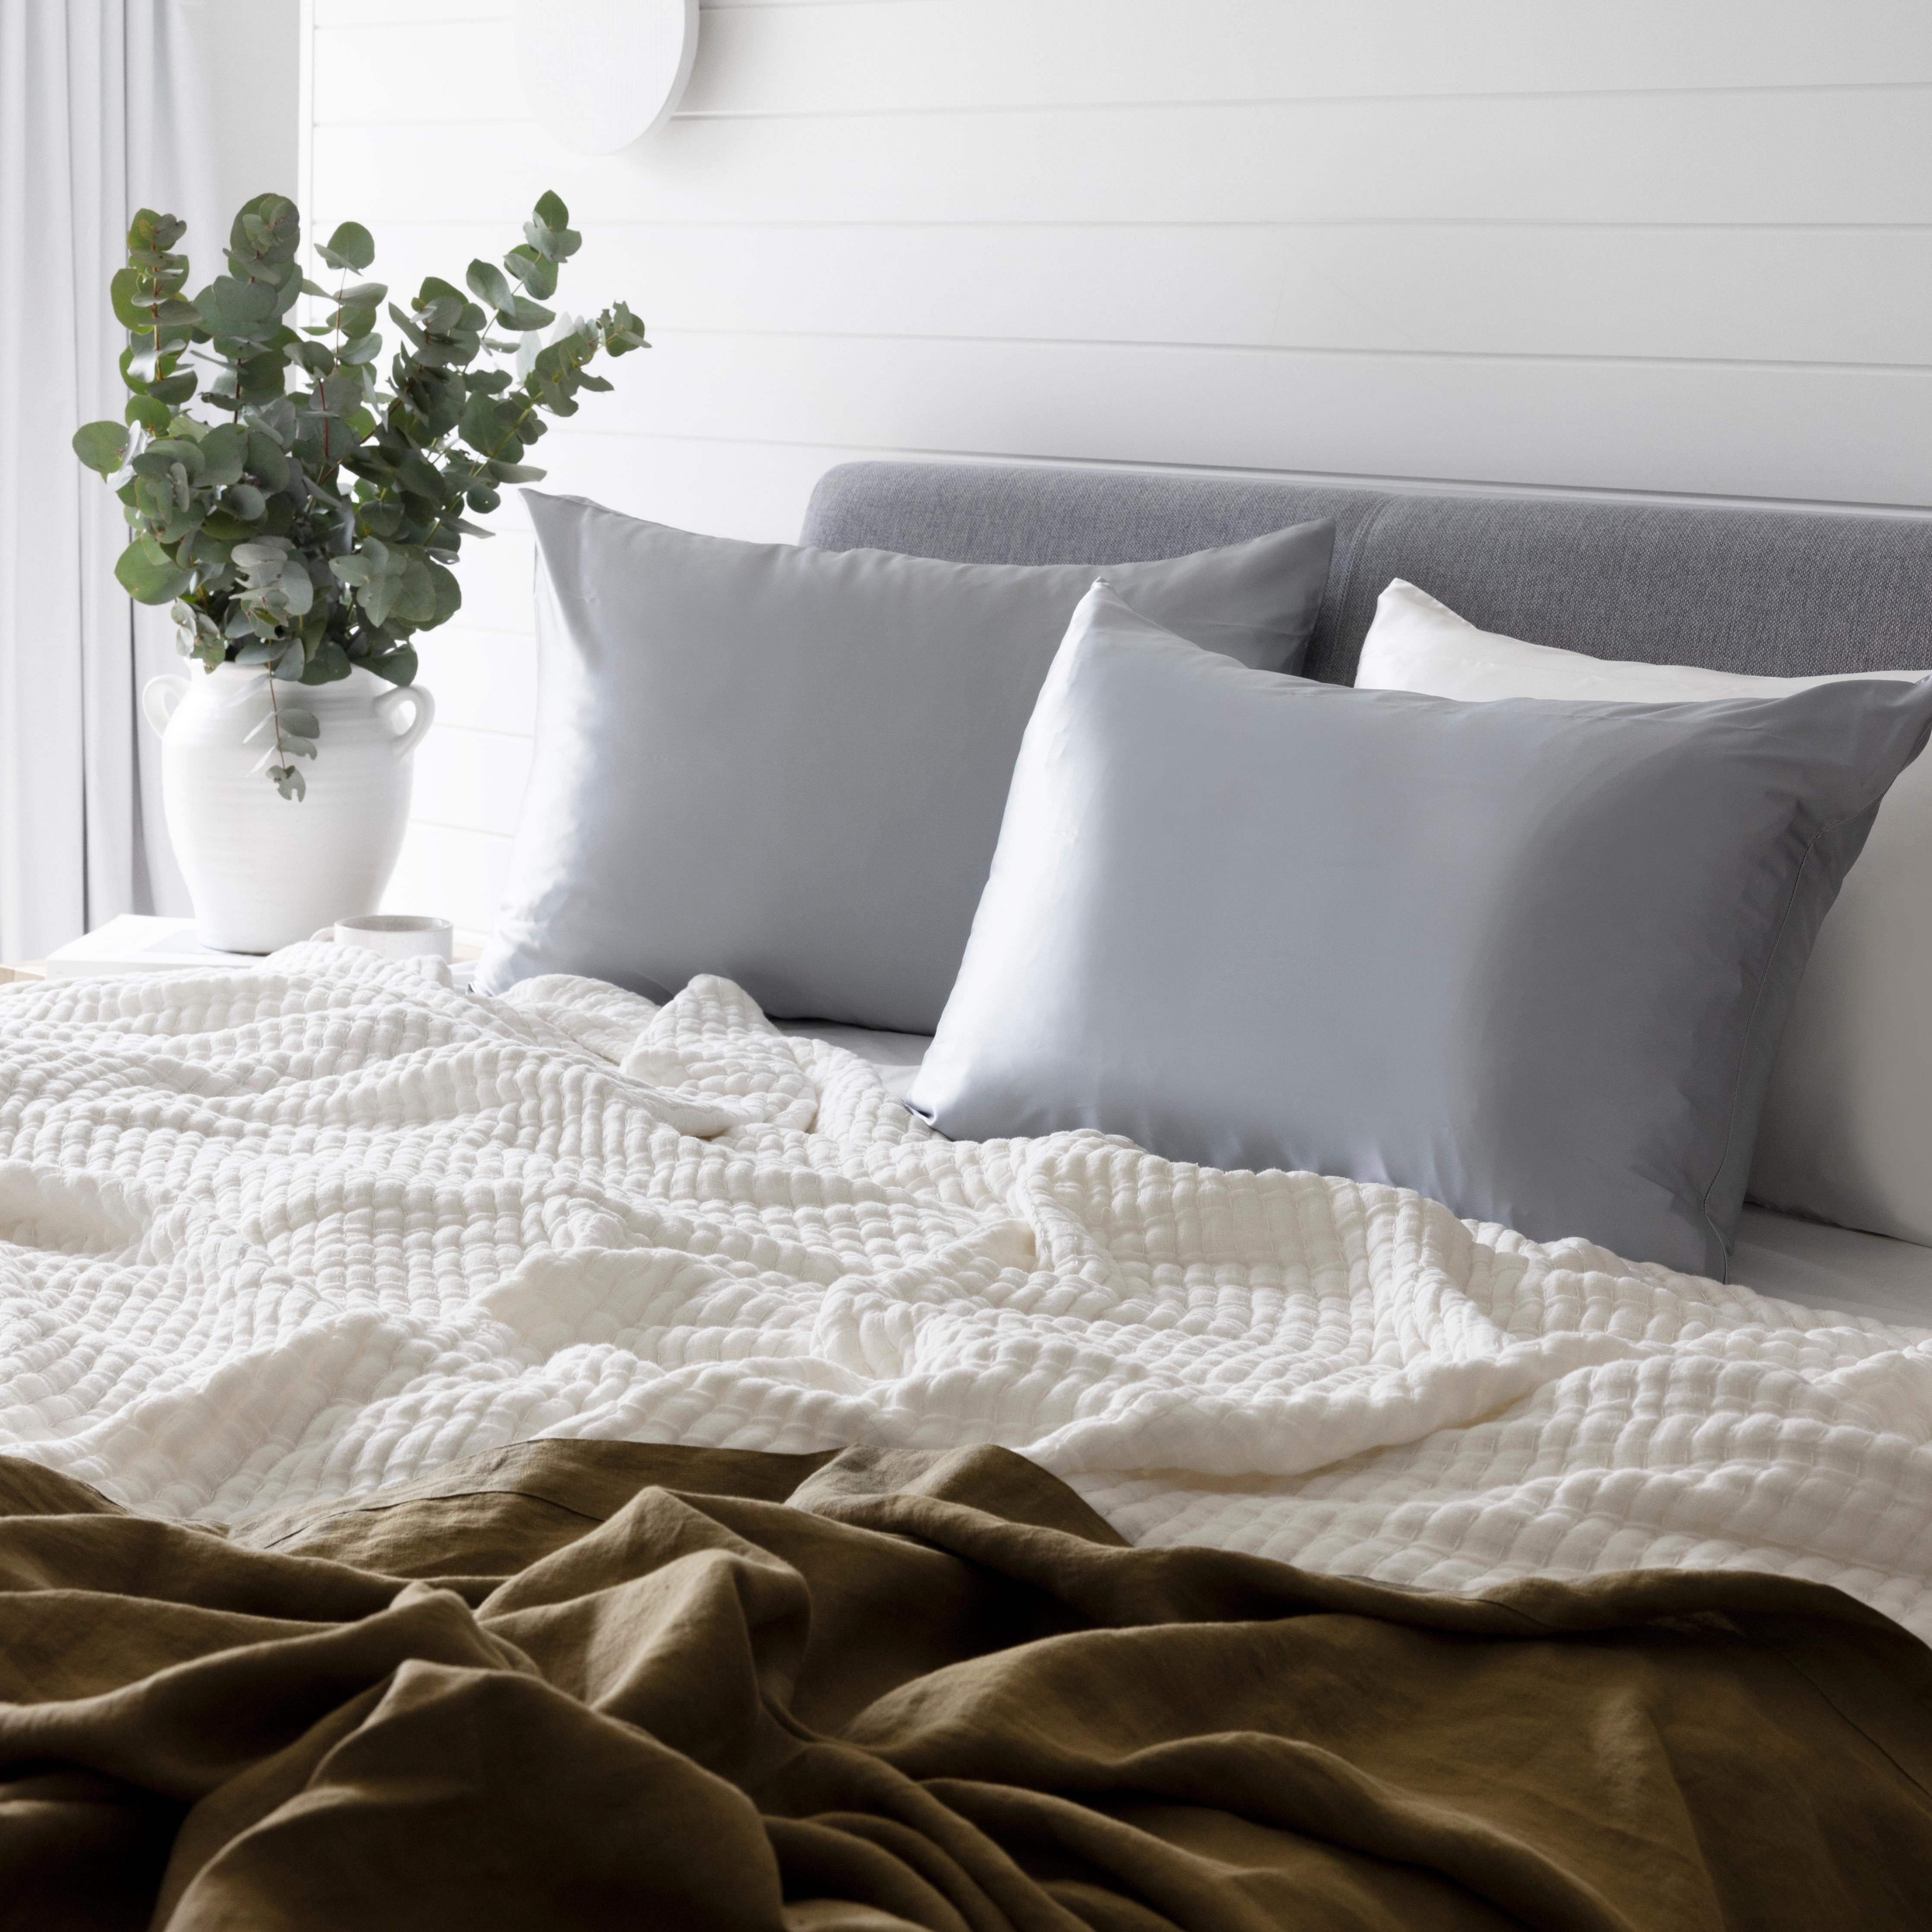 The Silk Pillowcase Made For Your Skin &amp; Hair - Lunalux